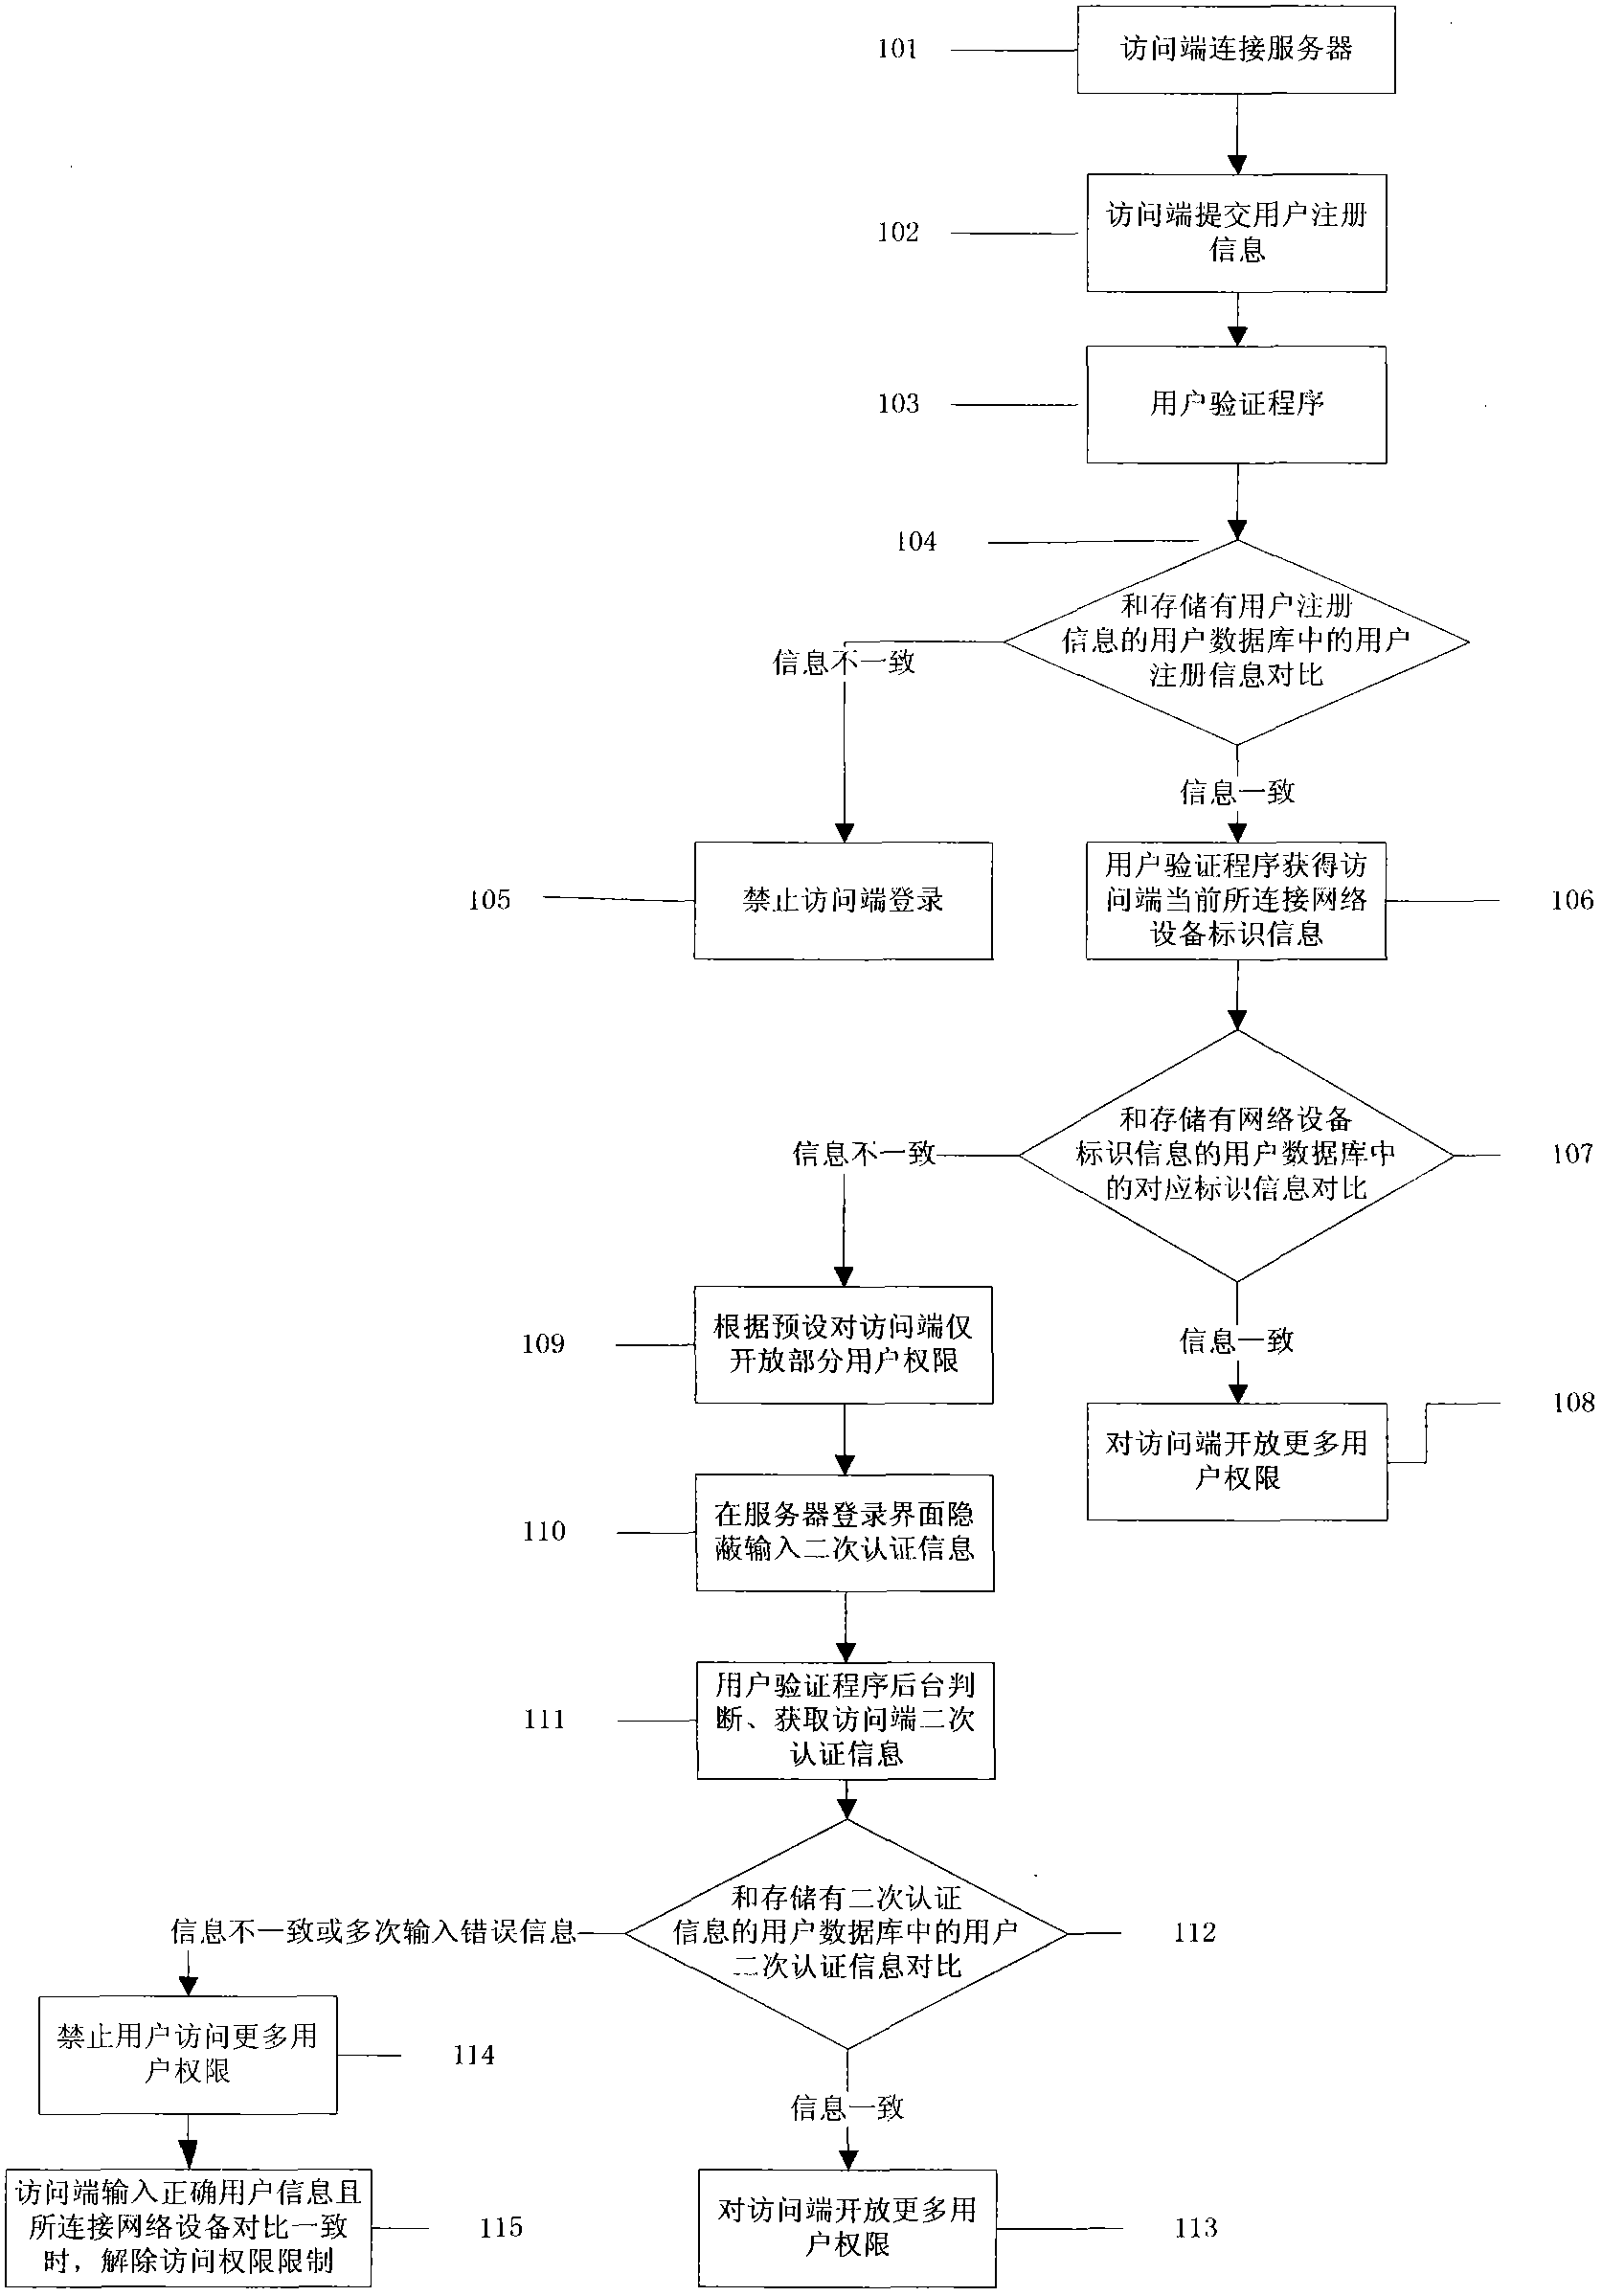 Network user identifying method and system